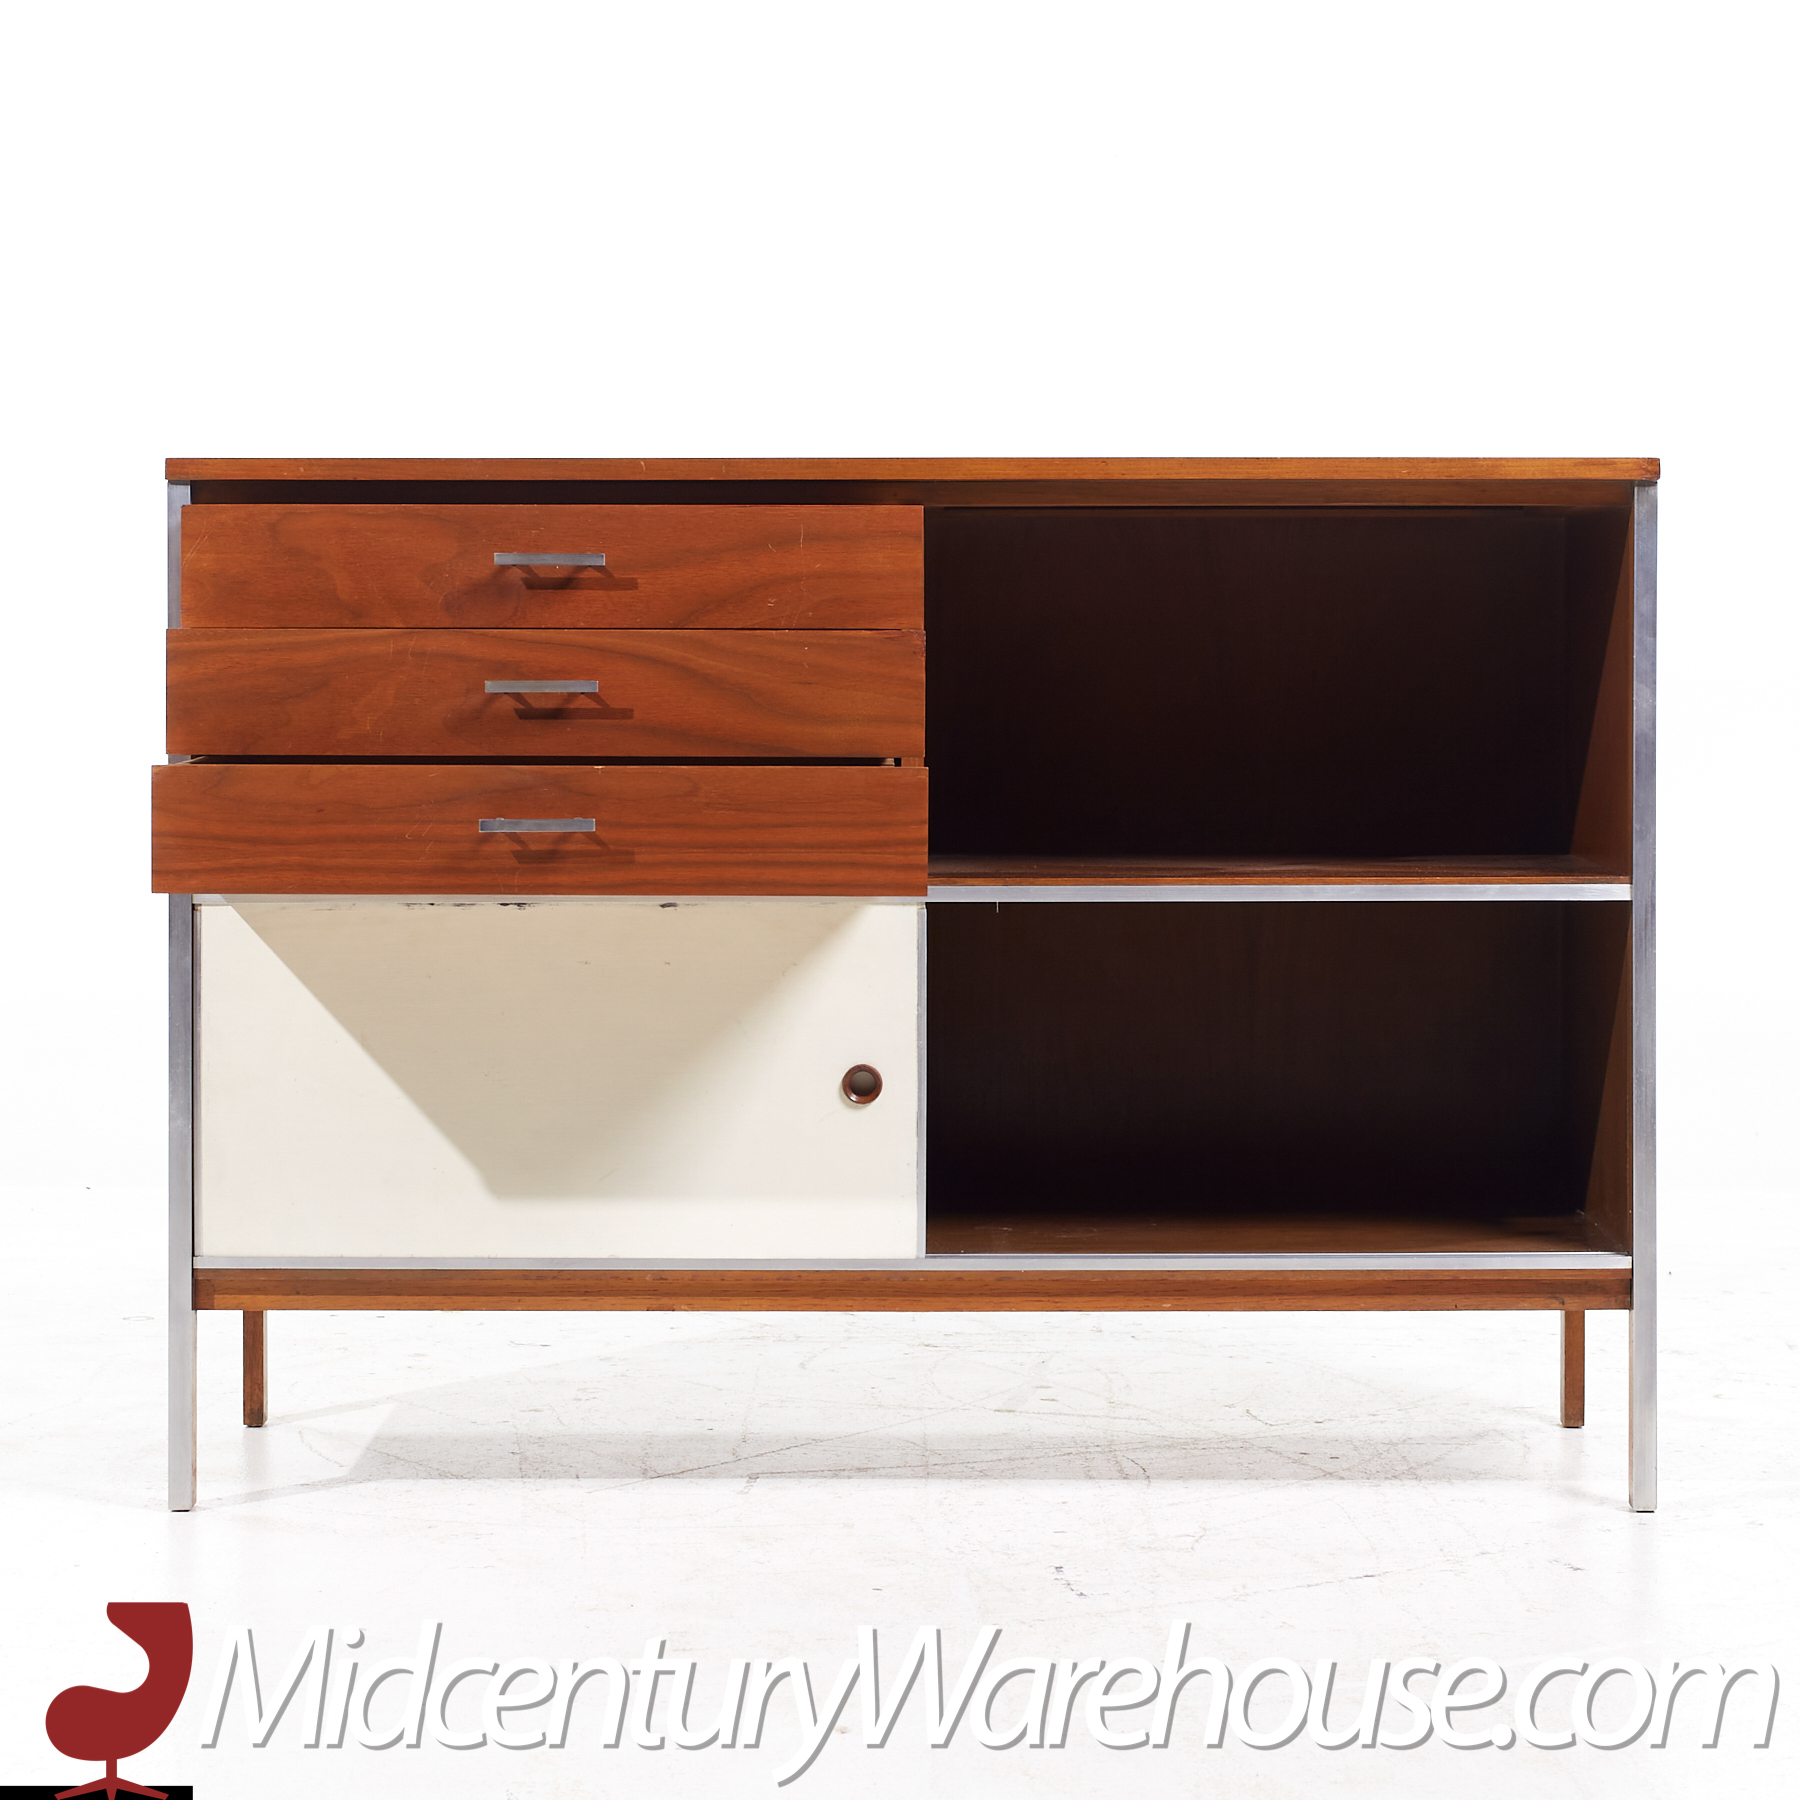 Paul Mccobb for Calvin Mid Century Walnut and Stainless Steel Sliding Door Credenza